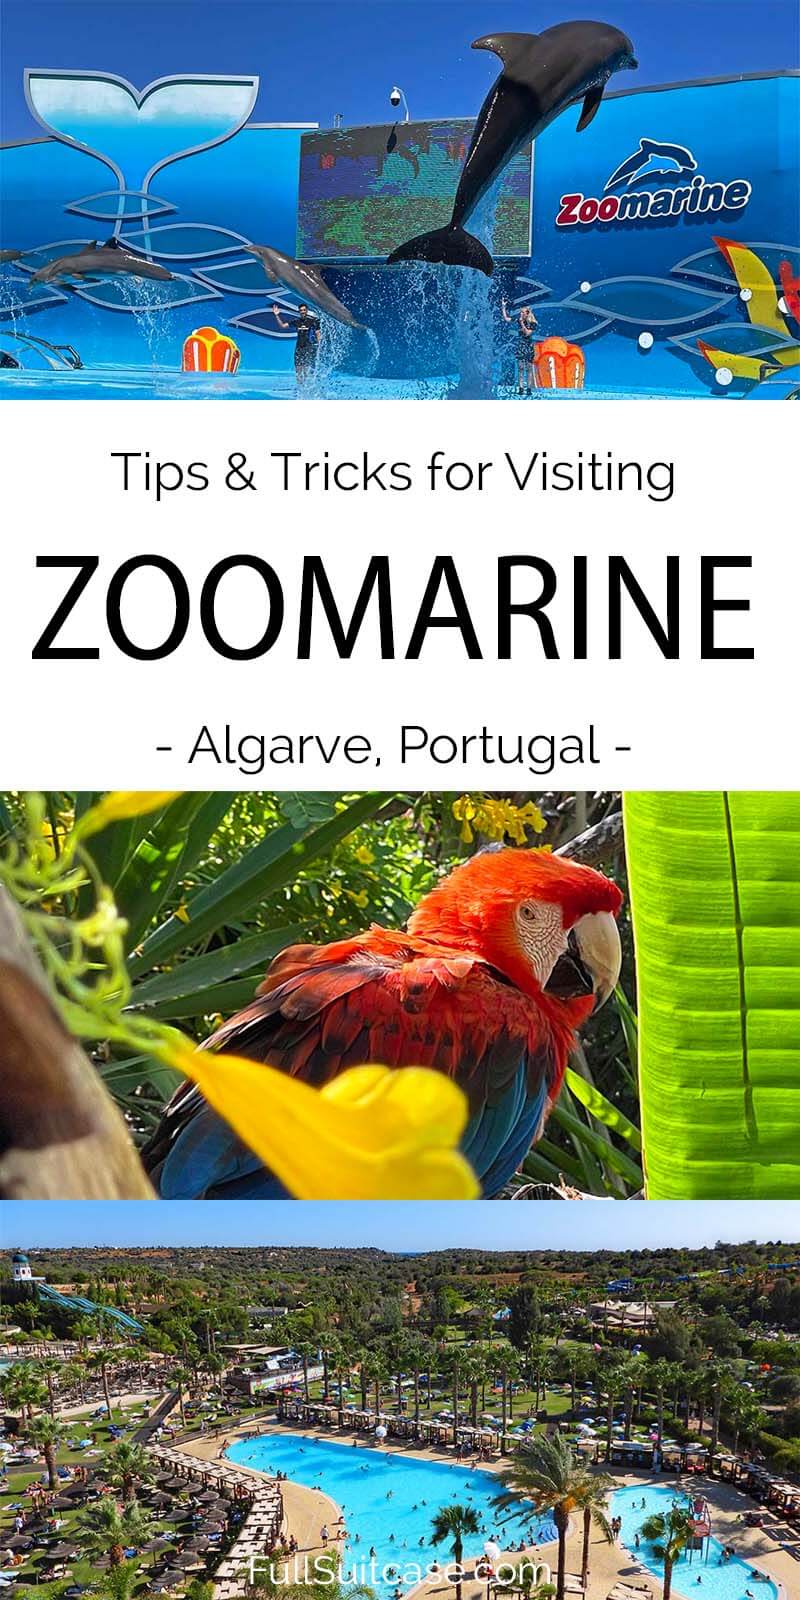 Tips and useful information for your first visit to Zoomarine Algarve theme park in Portugal